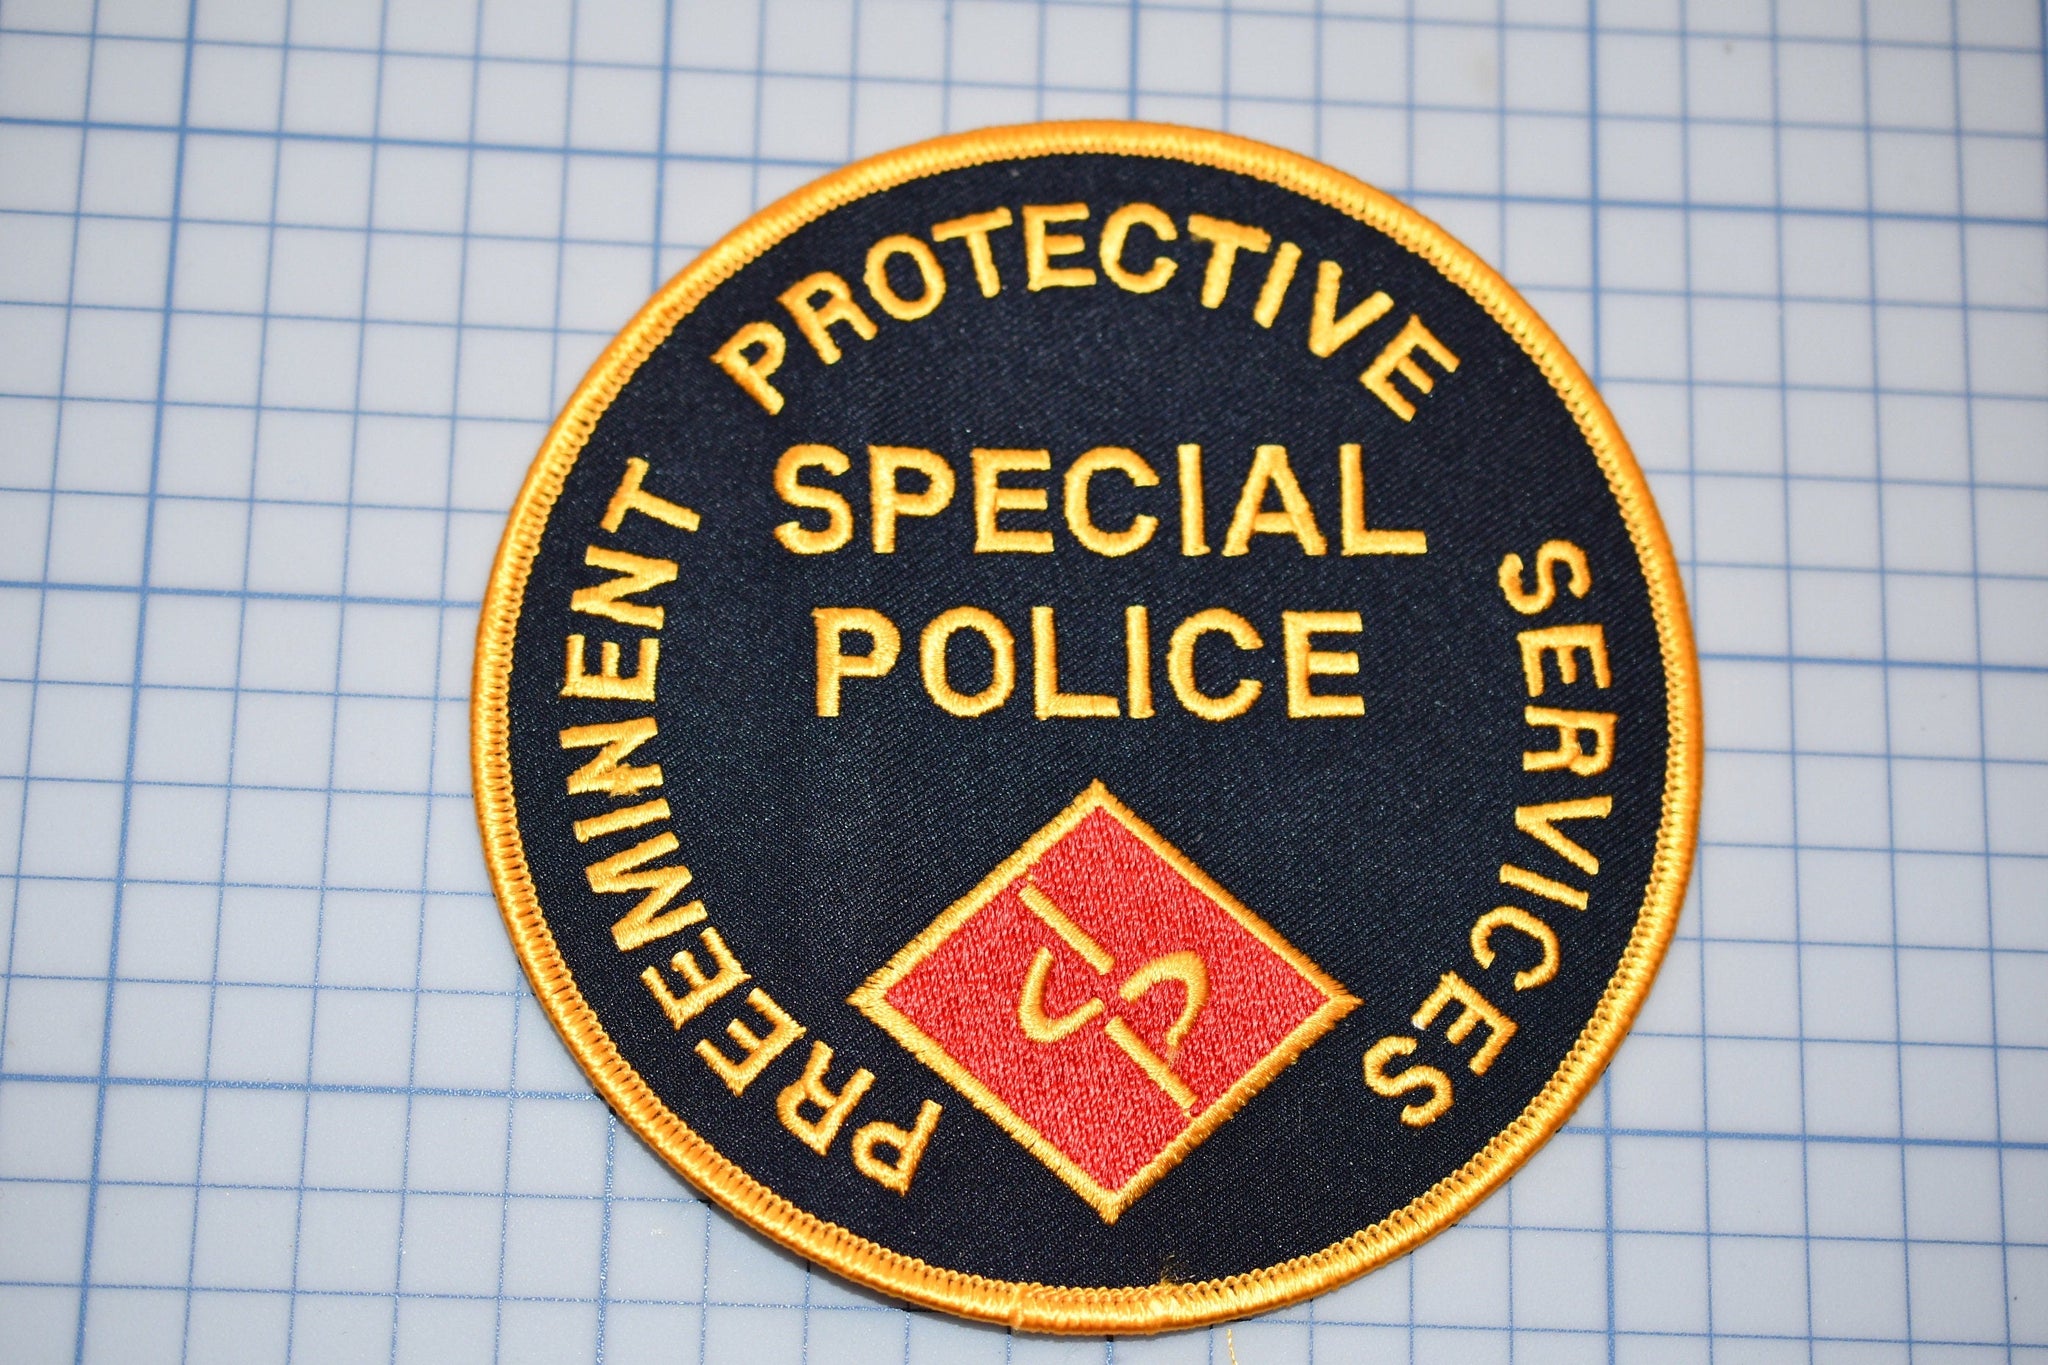 Preeminent Protective Services Washington D.C. Special Police Patch (B27-307)